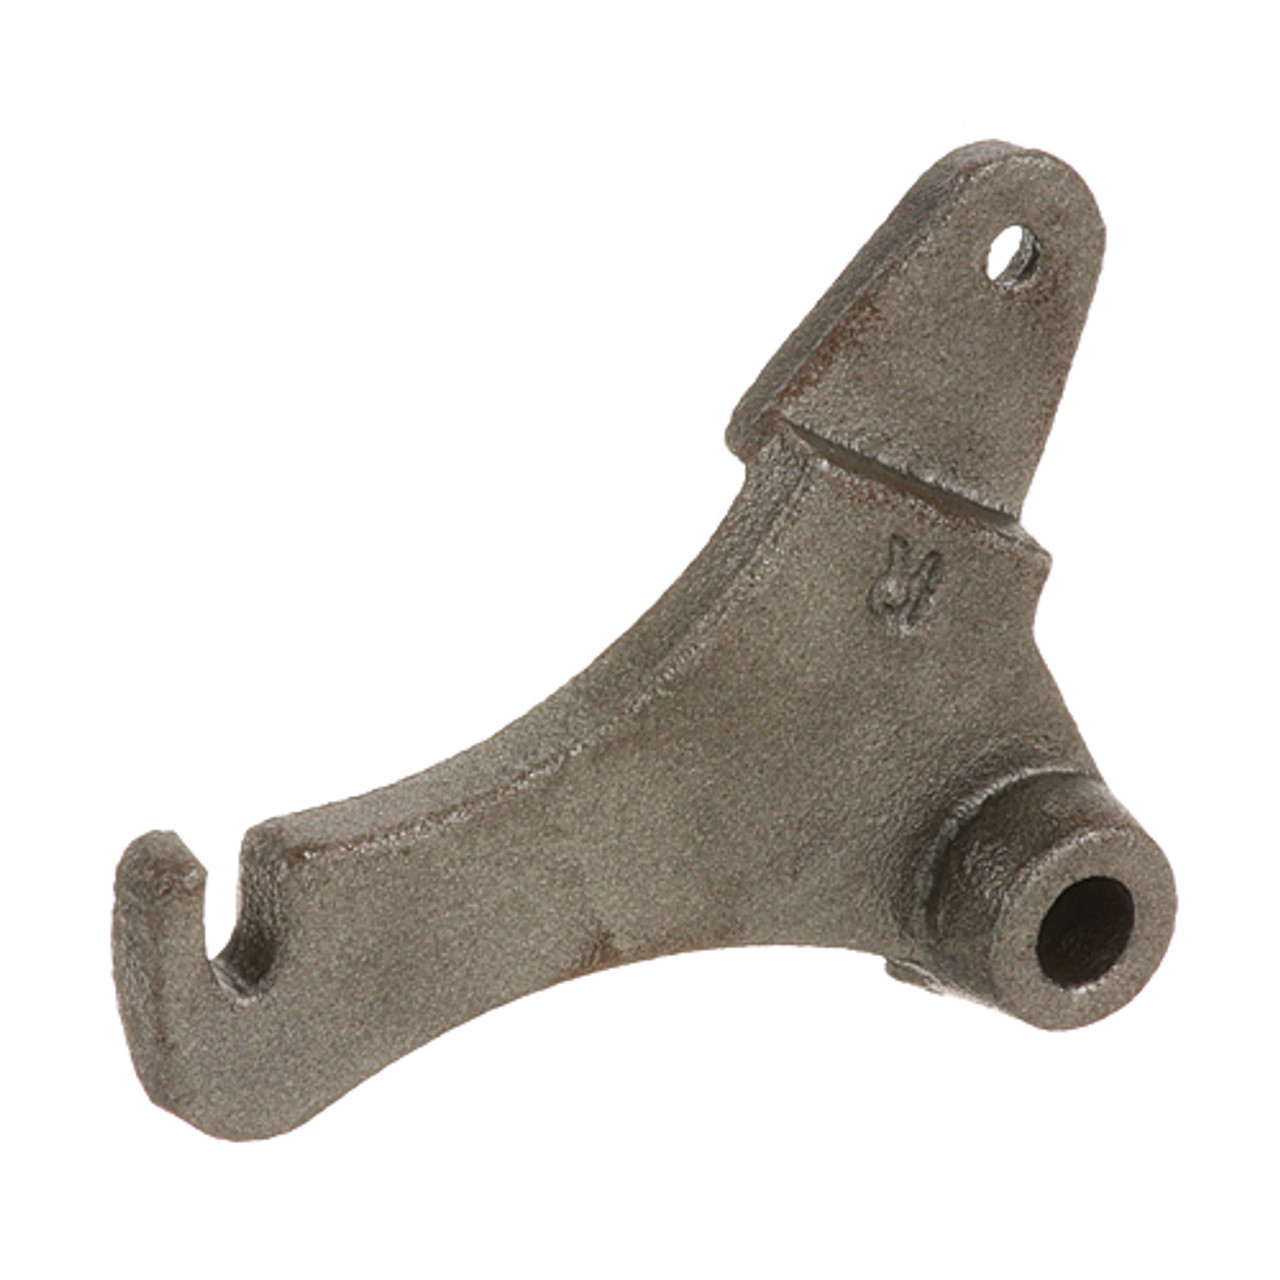 R H Rocker Arm - Replacement Part For Hobart 719711